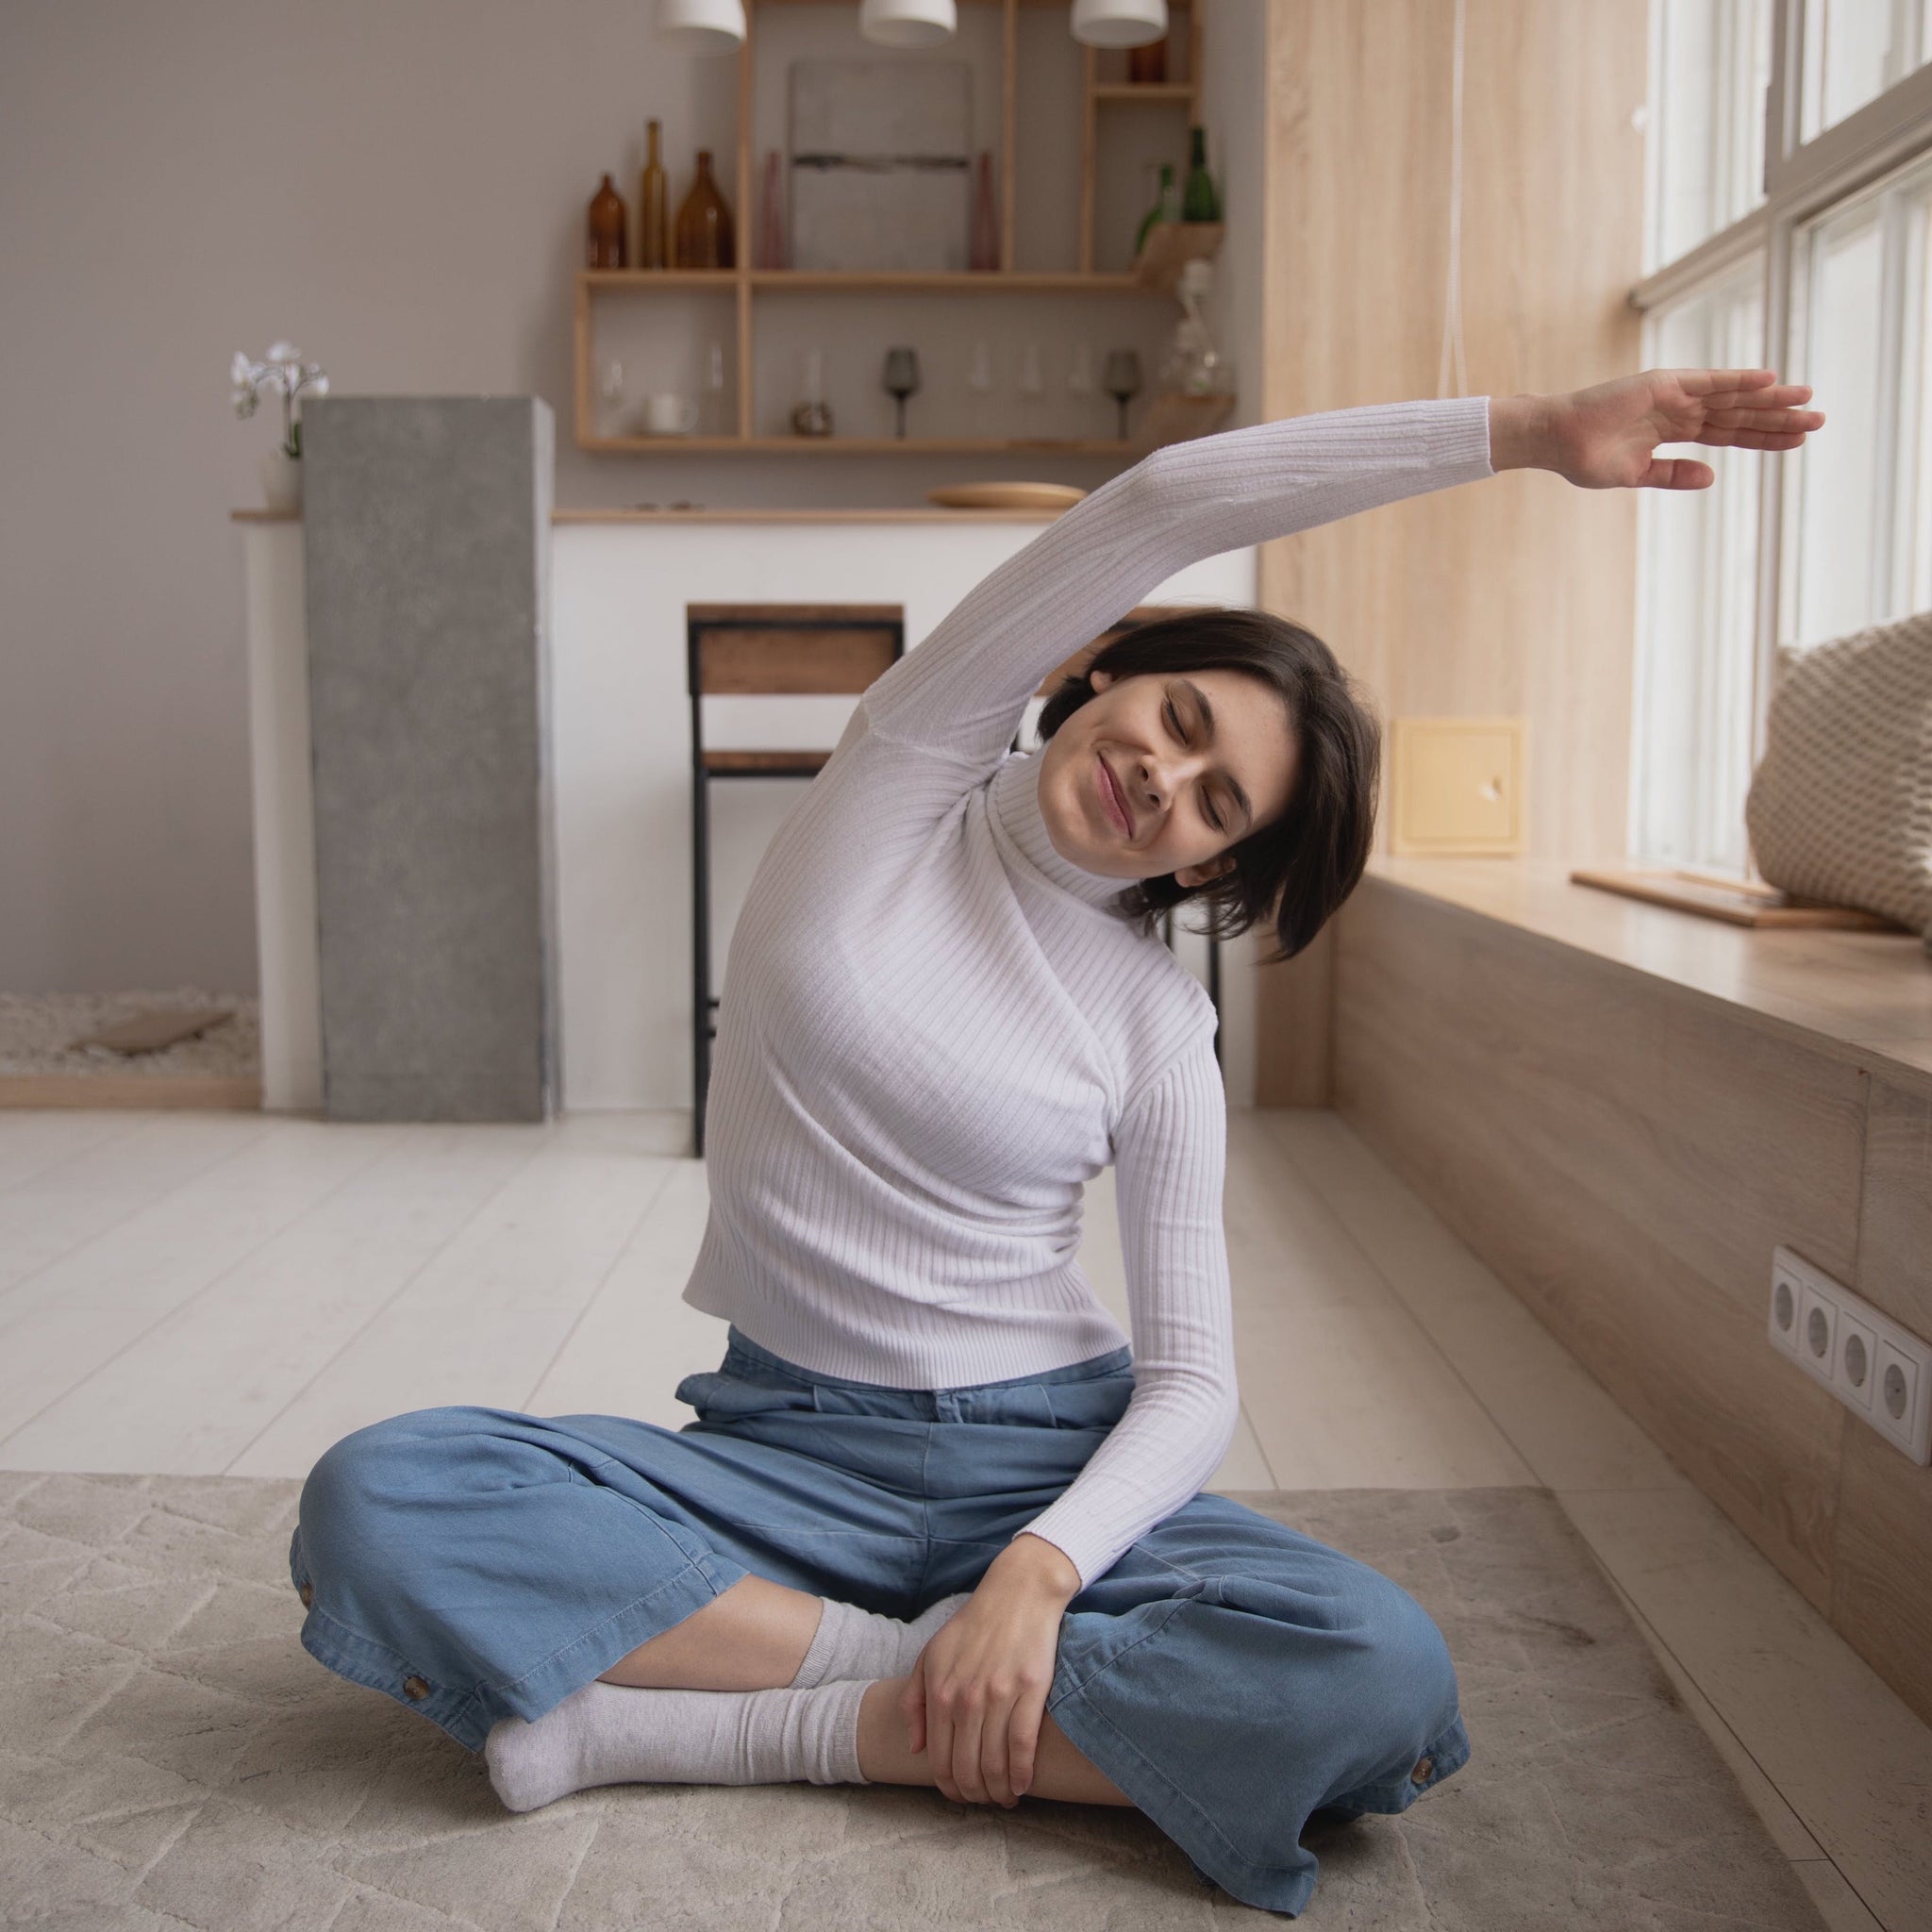 5 Essential At-Home Stretches for a Healthy Back